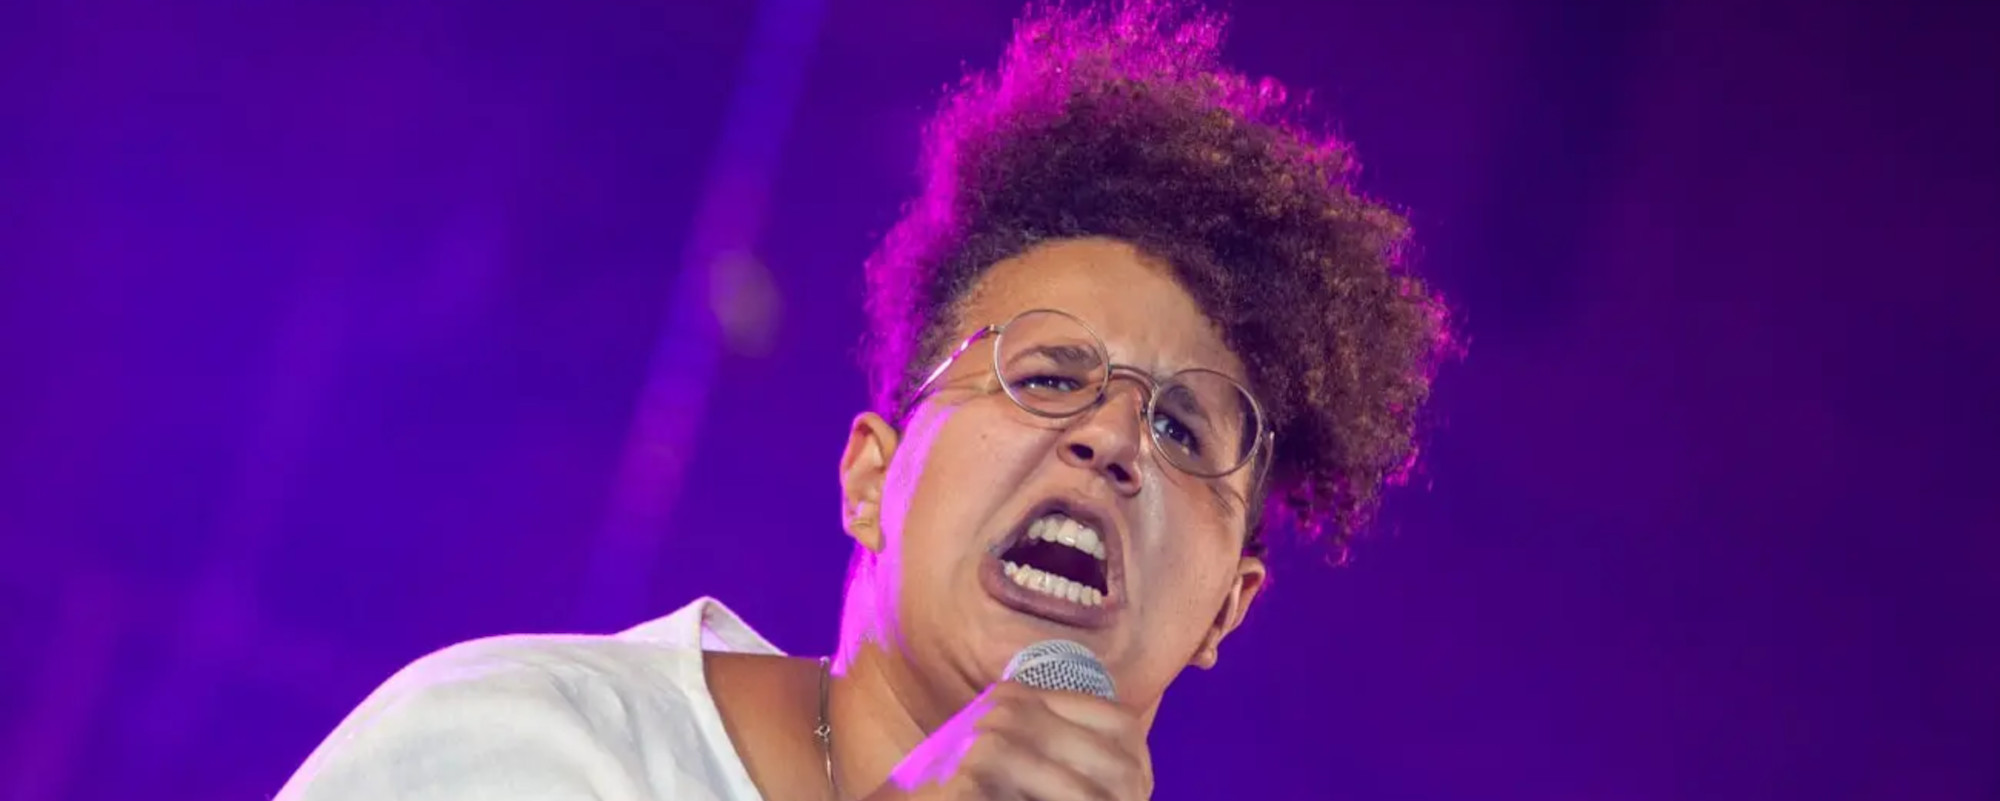 Alabama Shakes Announce Deluxe Re-Release of Hit LP, ‘Sound & Color’